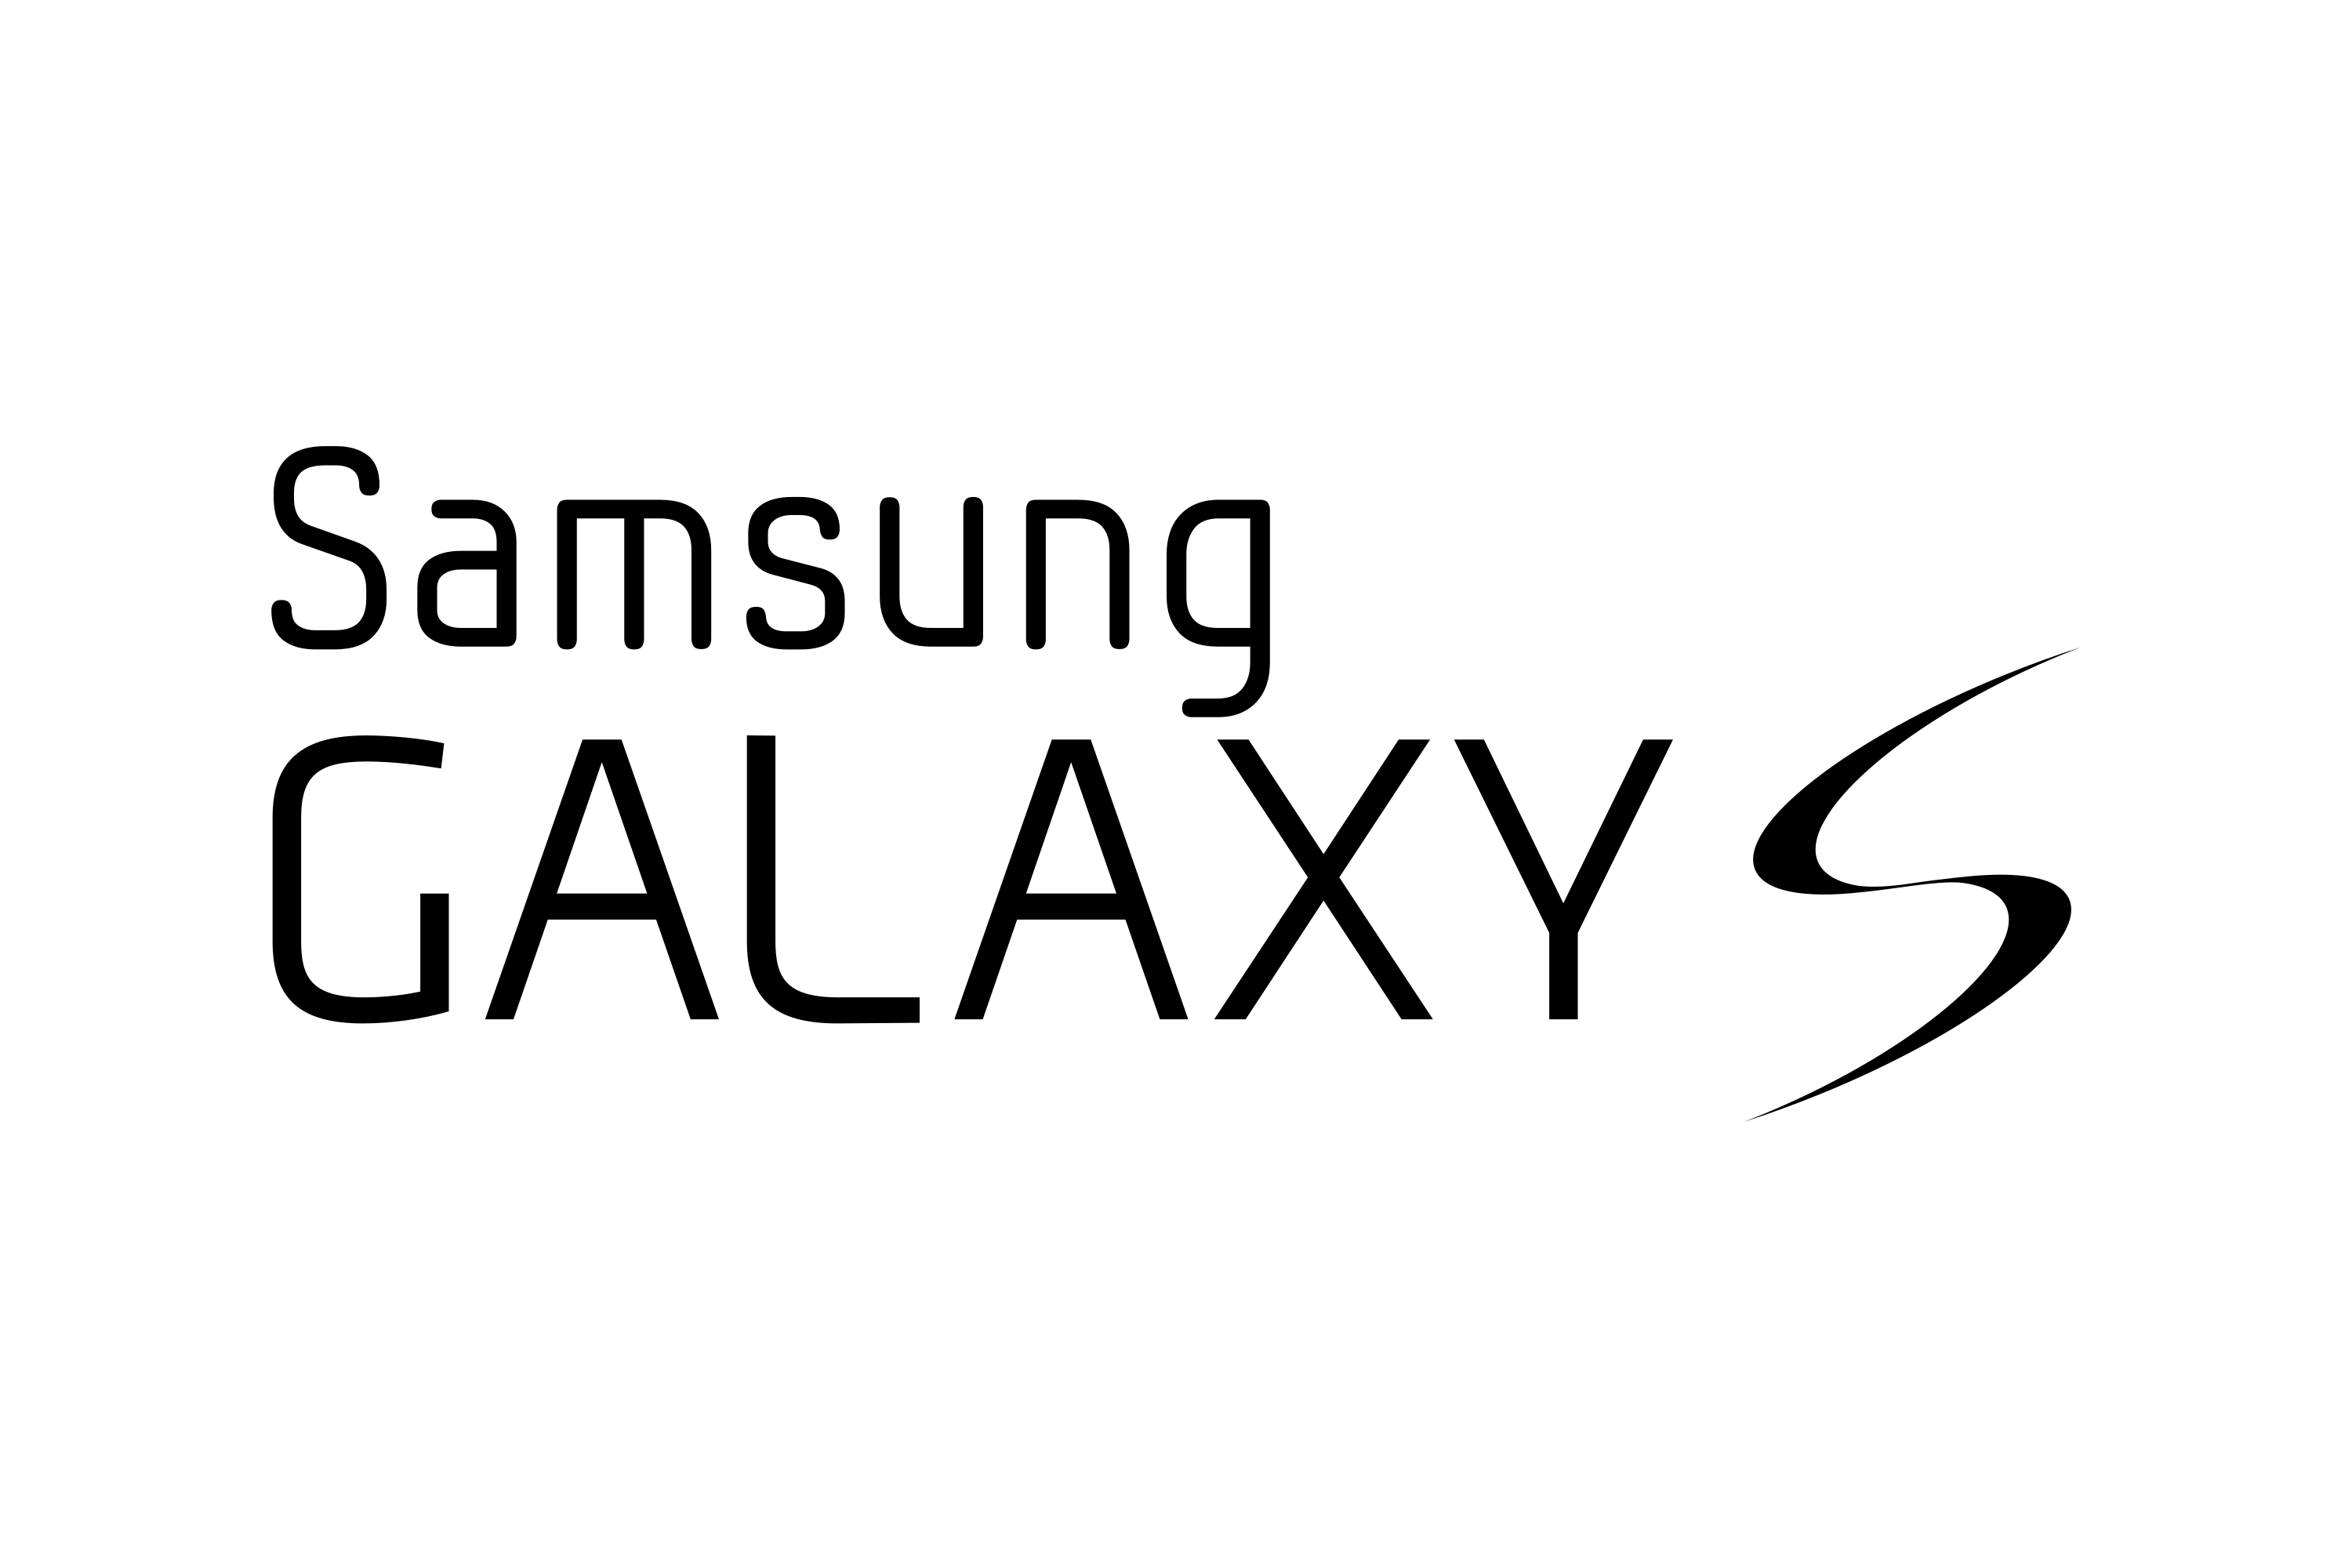 File:Samsung Galaxy S logo.png - Wikimedia Commons